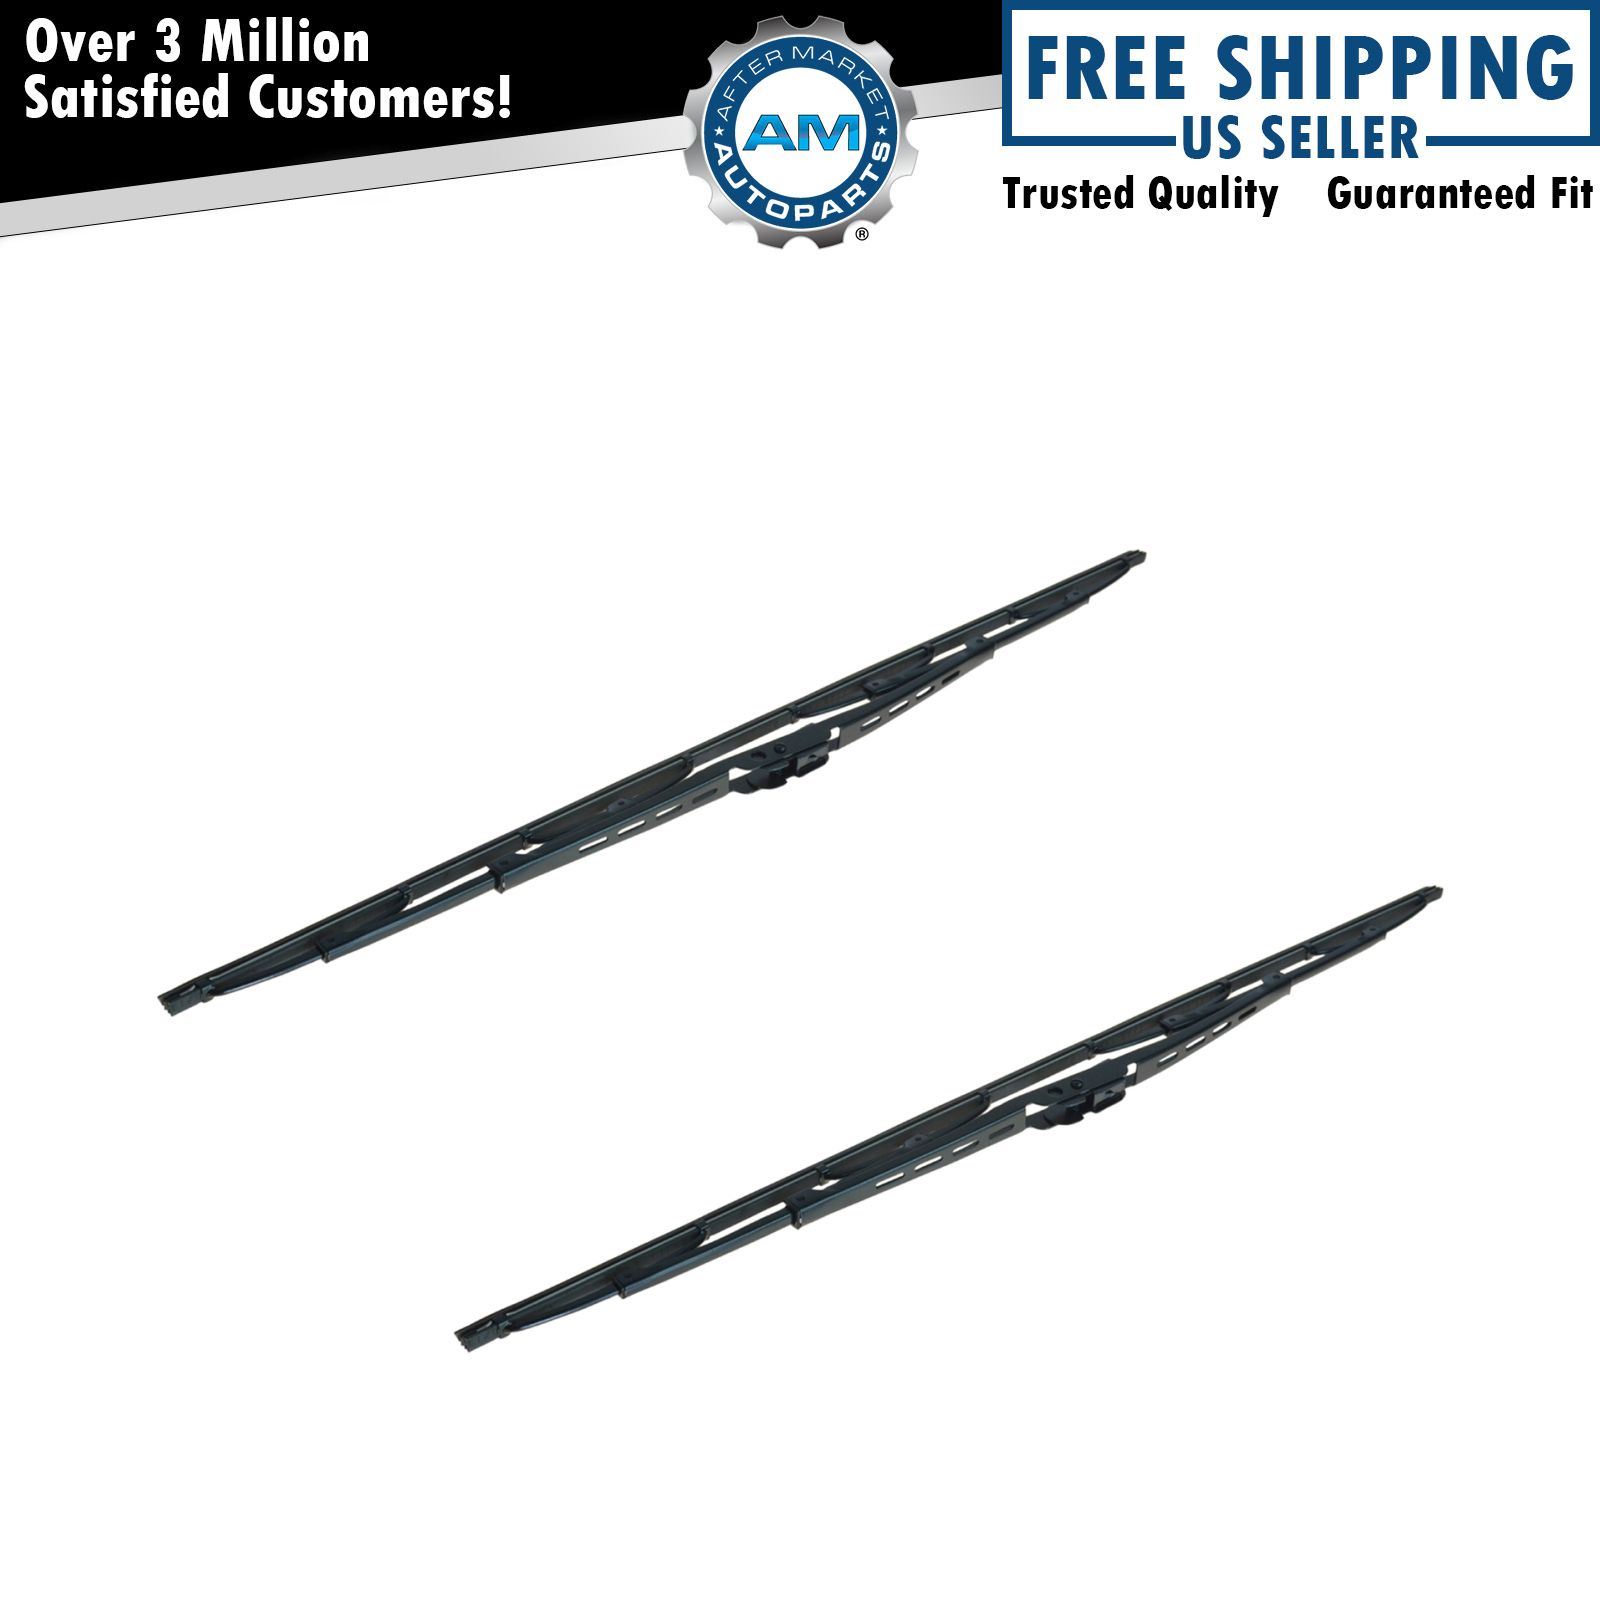 AC Delco 8-4422 Advantage Windshield Wiper Blade Kit Pair Set of 2 for GM New